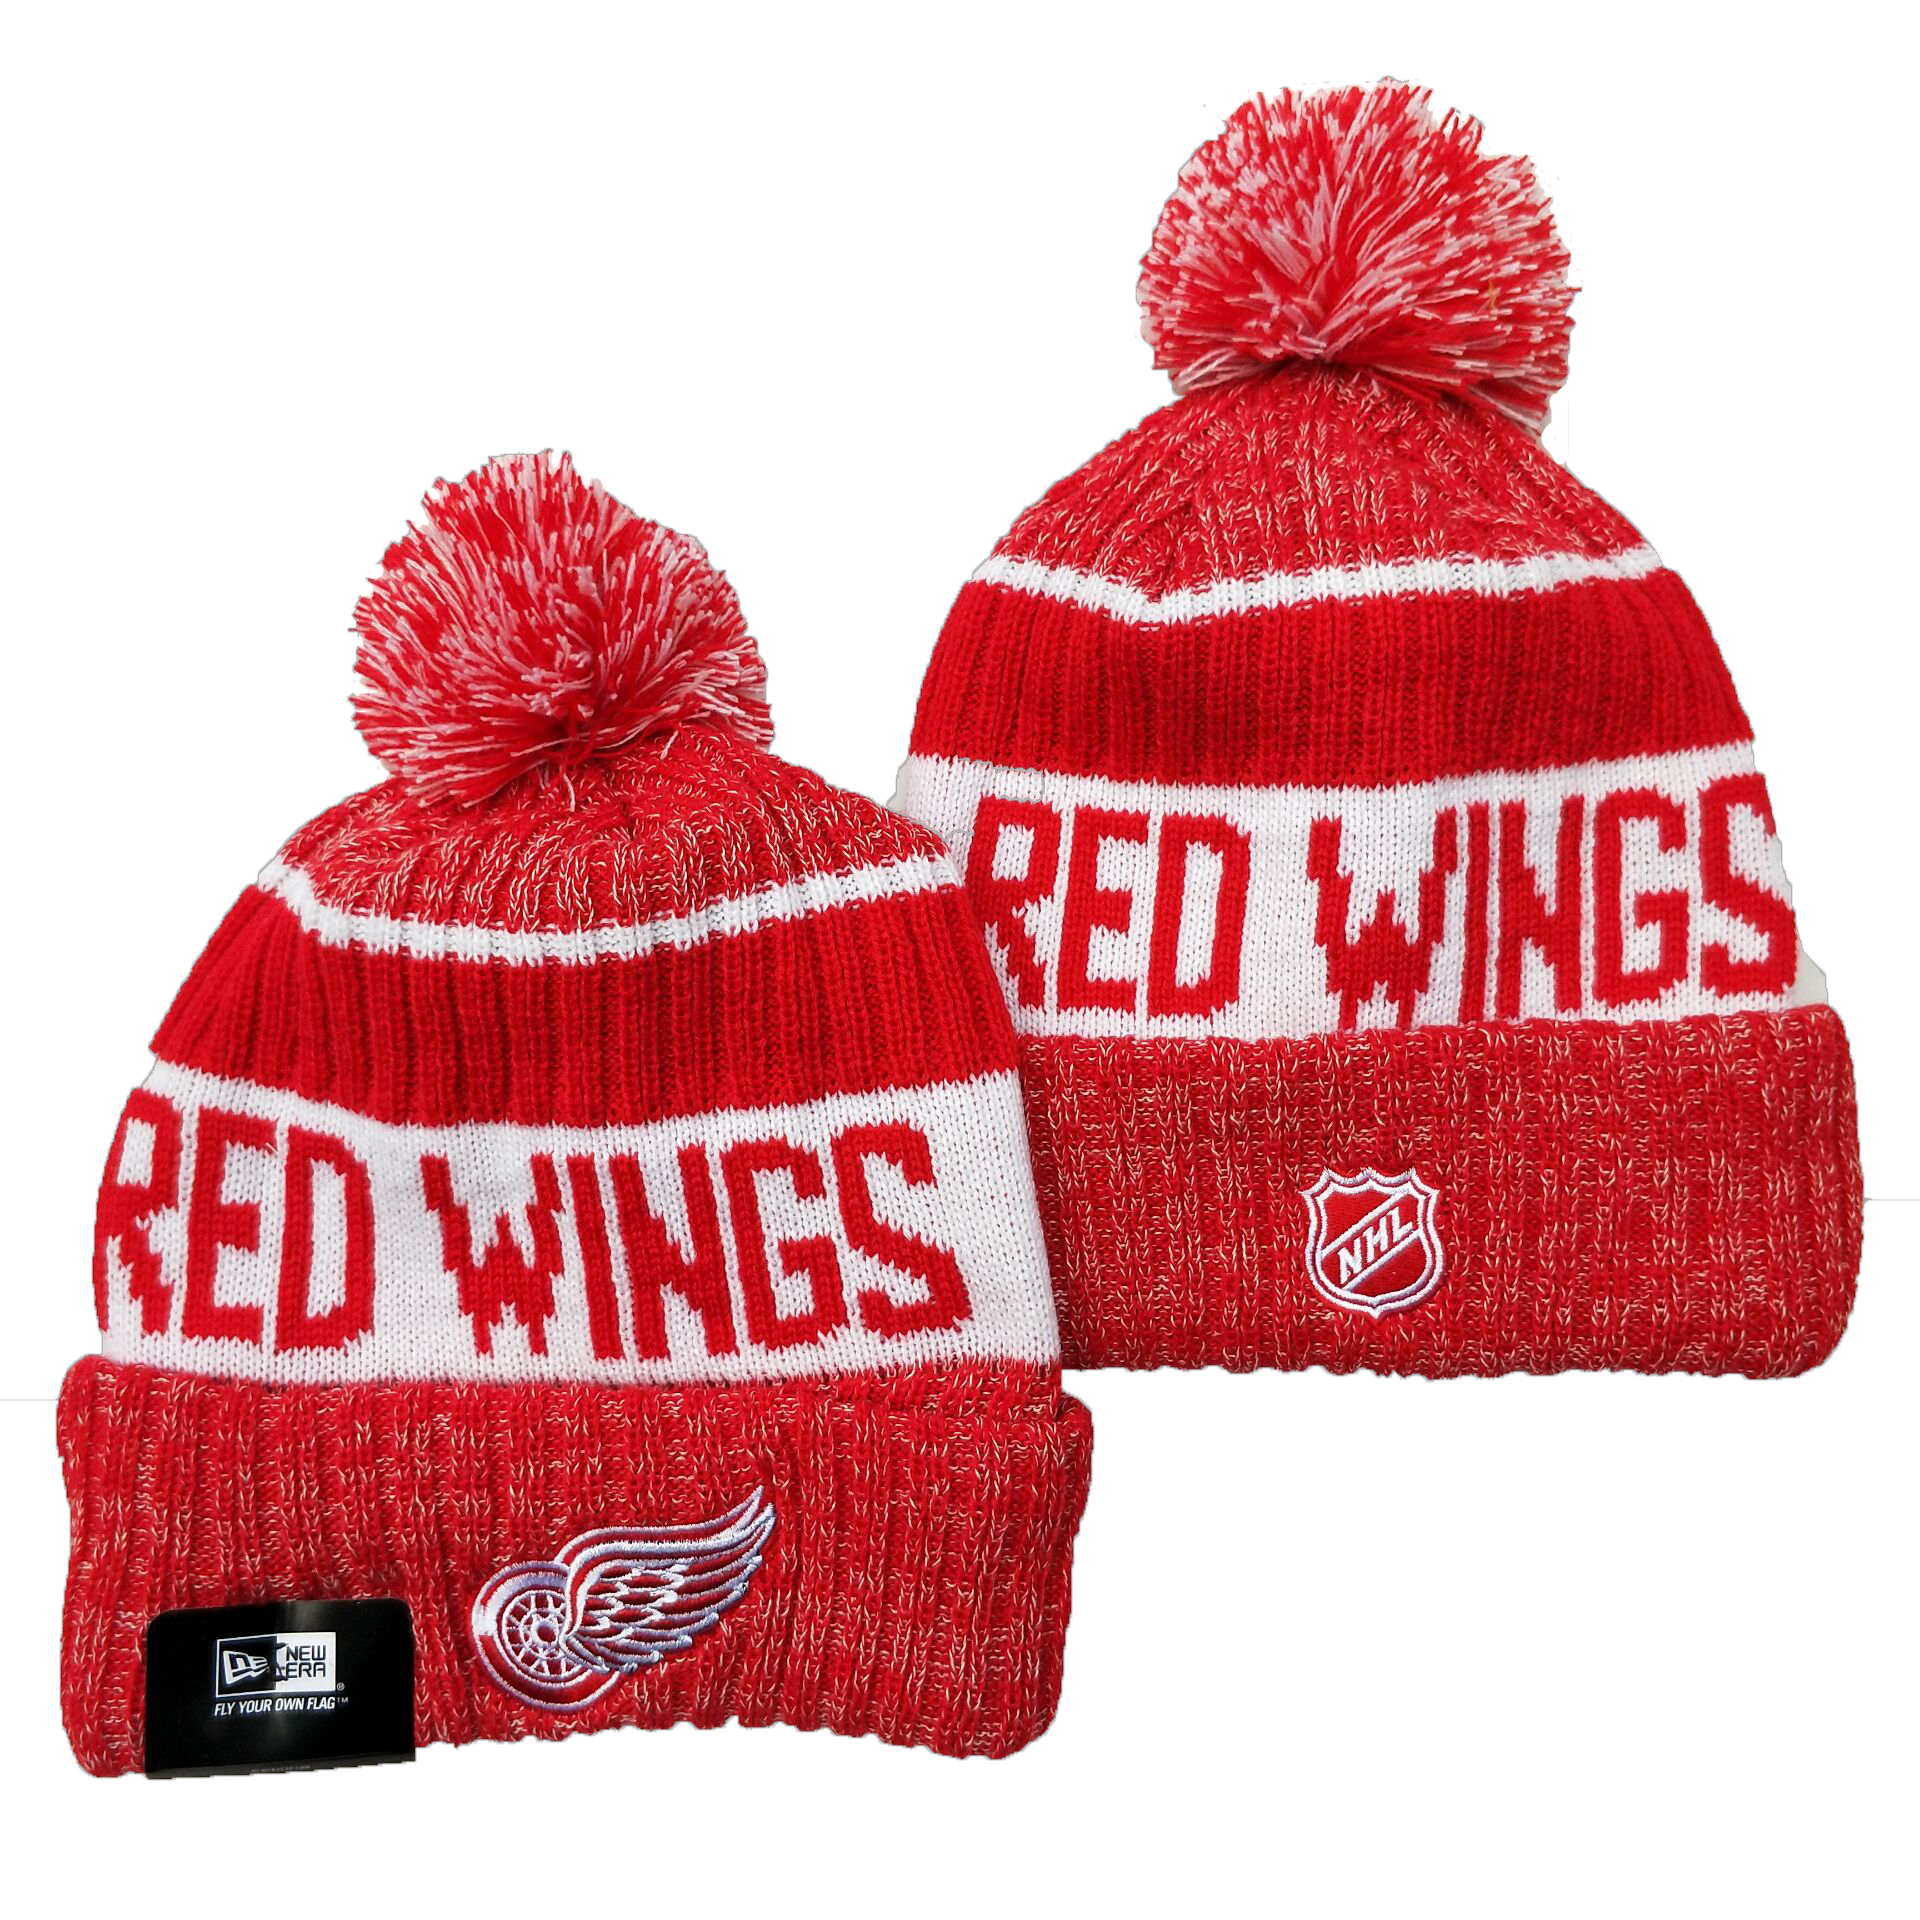 Detroit Red Wings Knit Hats 001